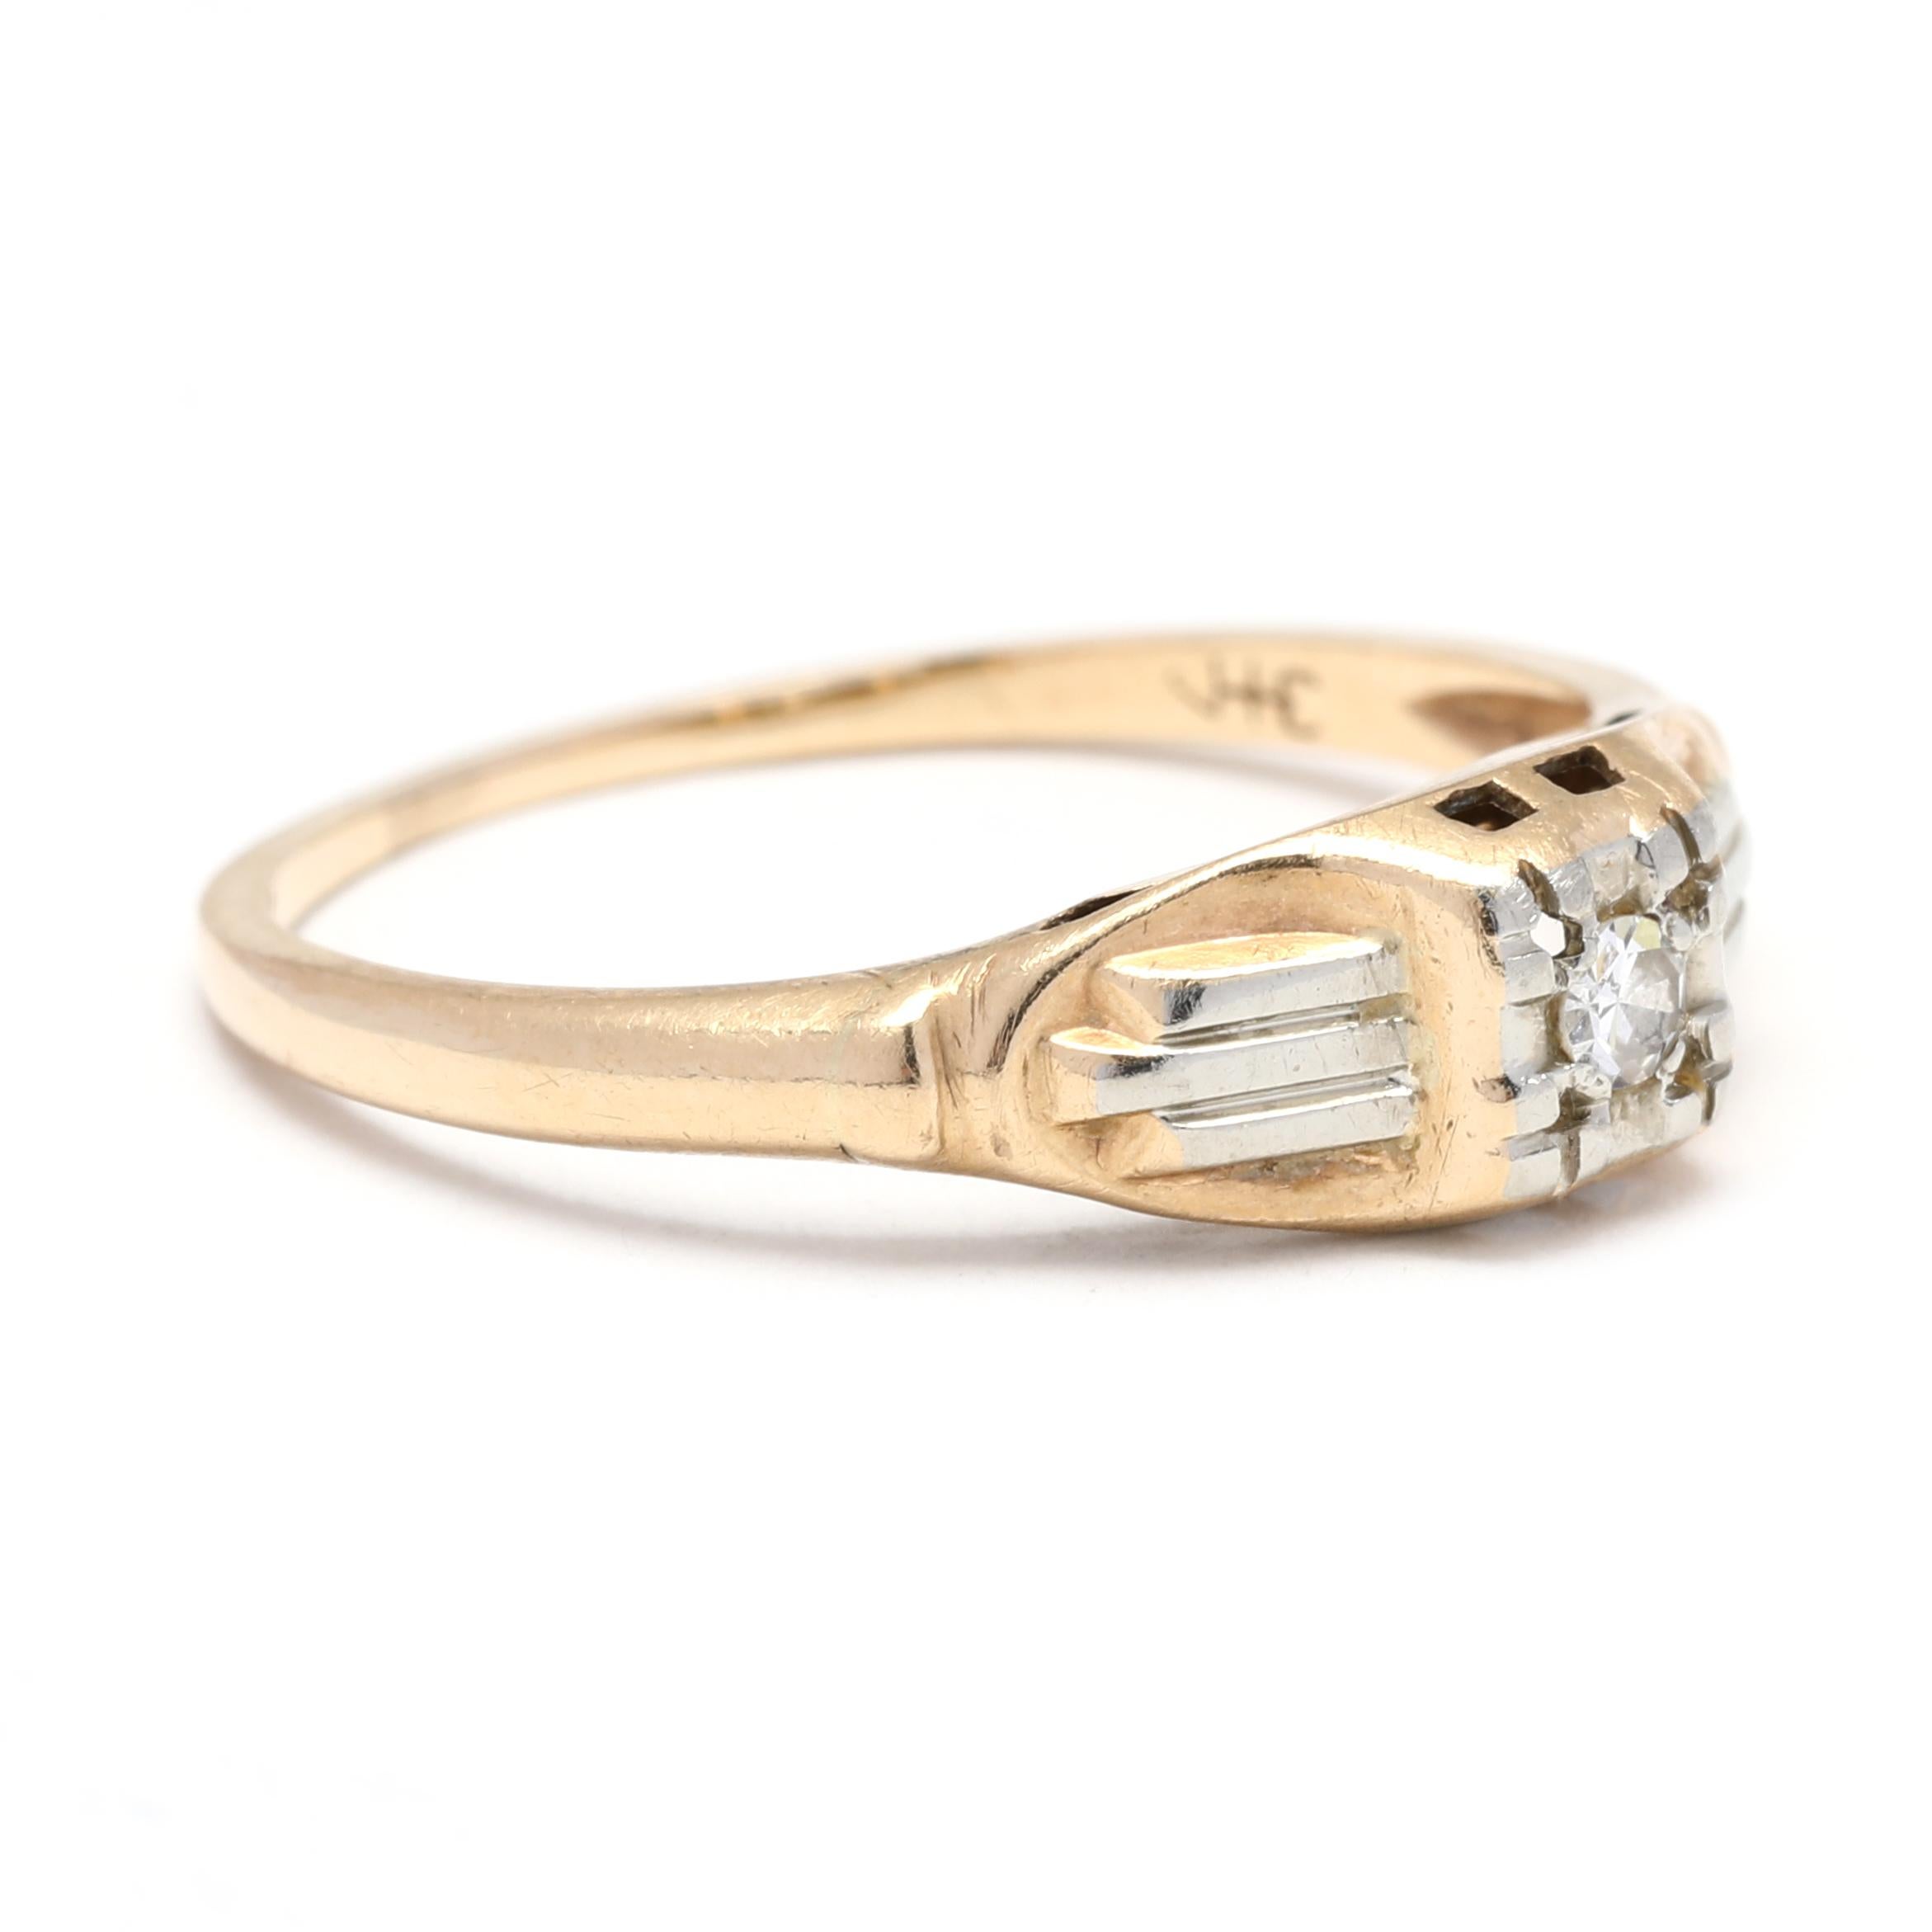 This dazzling 0.02ct retro diamond engagement ring is beautifully crafted from 14-18k yellow white gold, making it the perfect gift for your loved one. A sparkly champagne-hued diamond is set on a stylish retro-style yellow gold and white gold